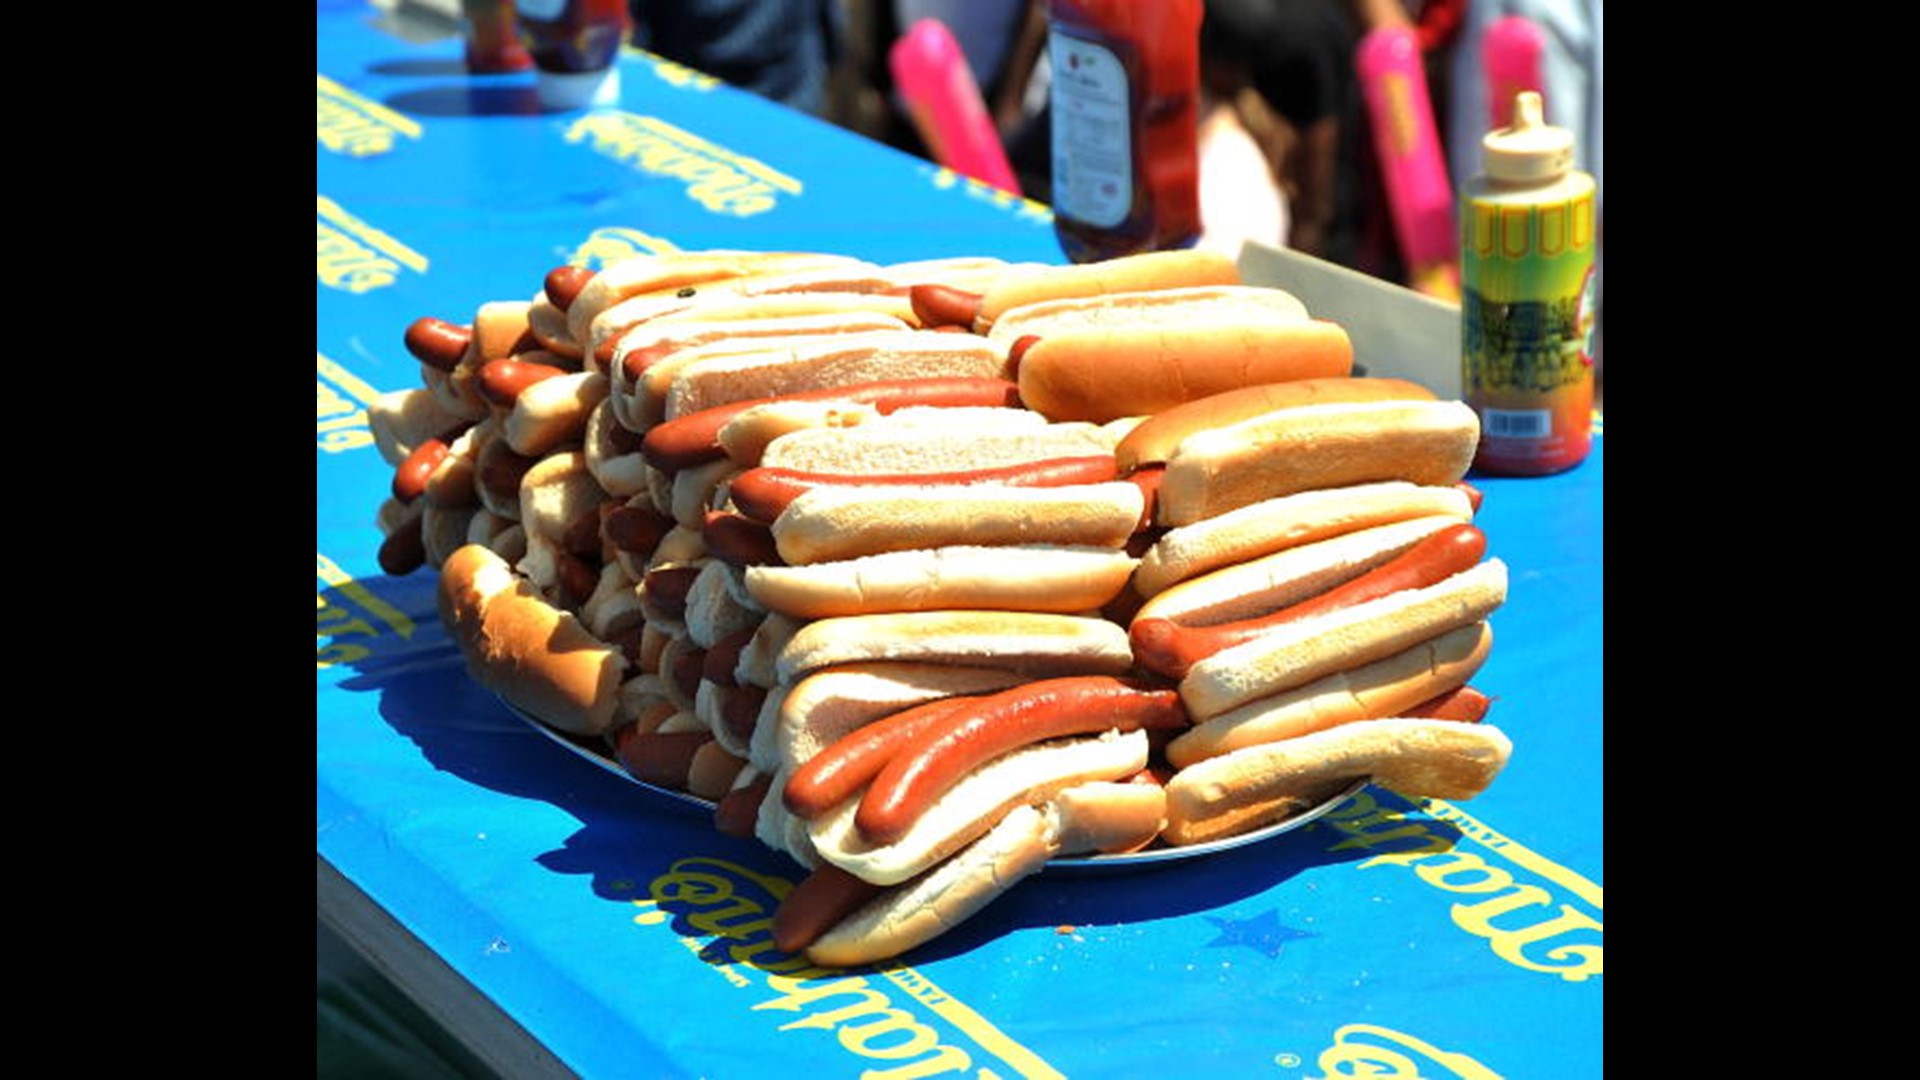 Two Monroe County residents ate their way through Nathan's hot dog contest on Coney Island.